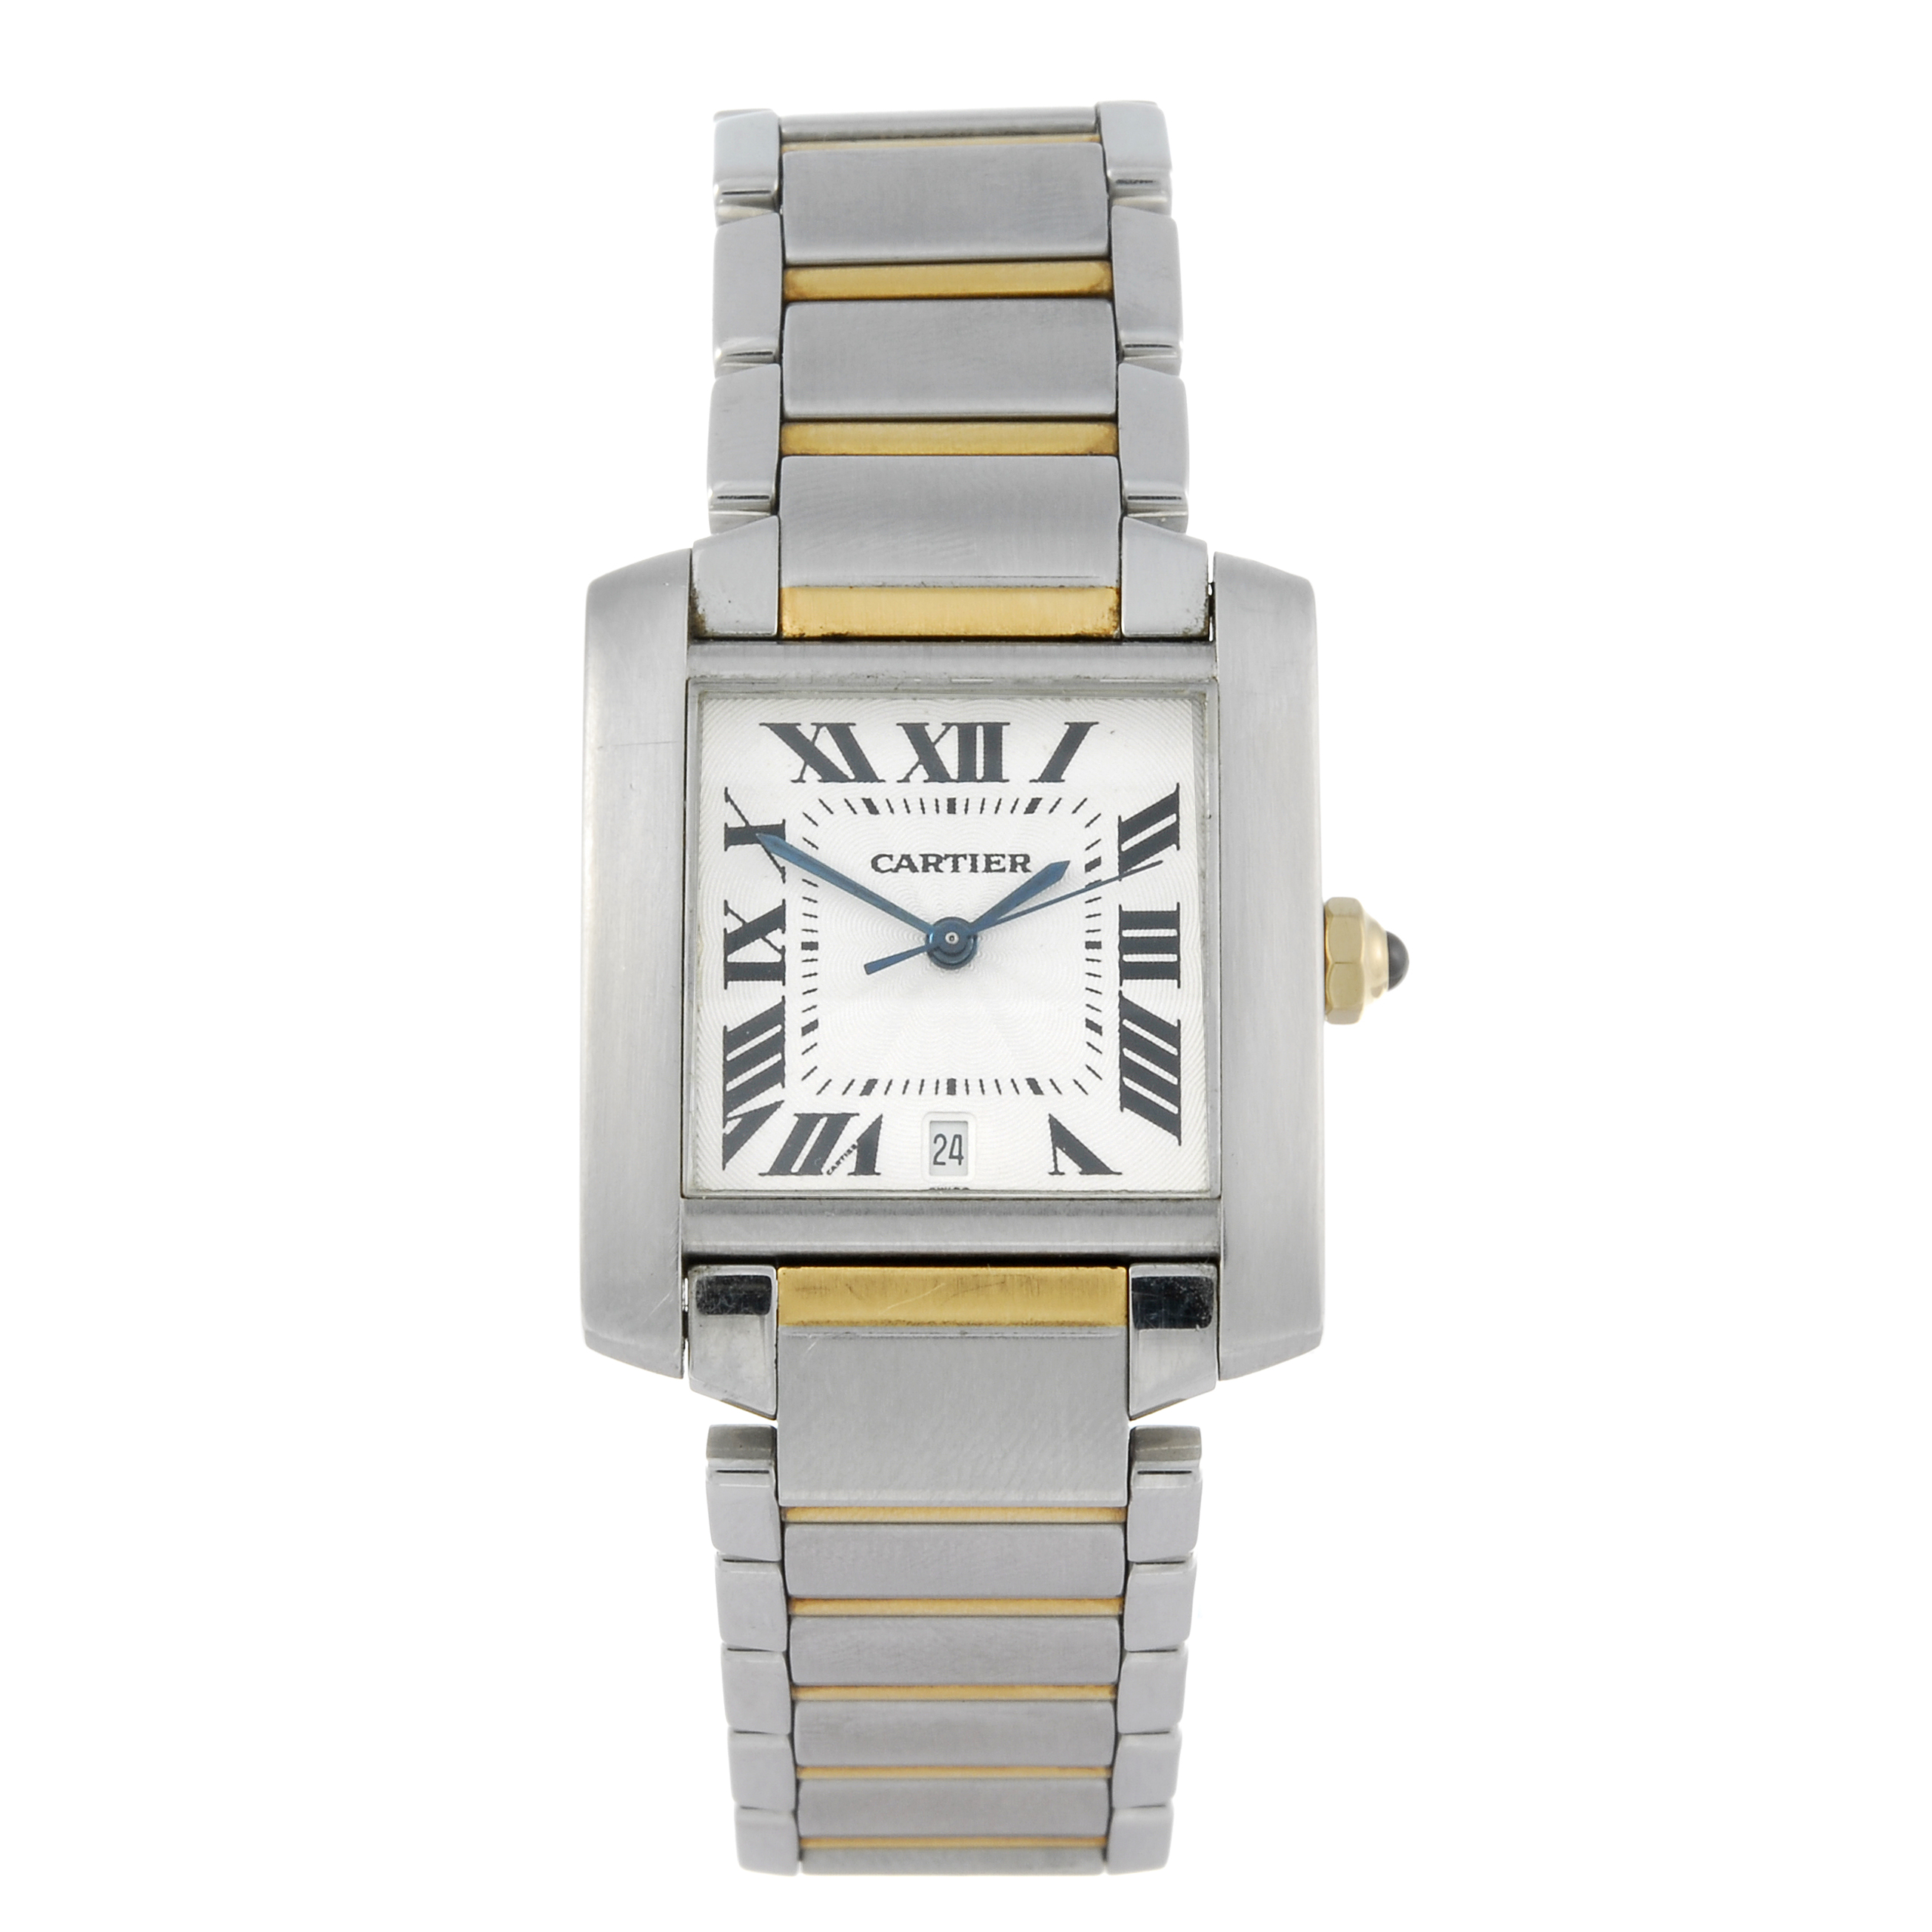 CARTIER - a Tank Francaise bracelet watch. Stainless steel case. Reference 2302, serial CC800199.